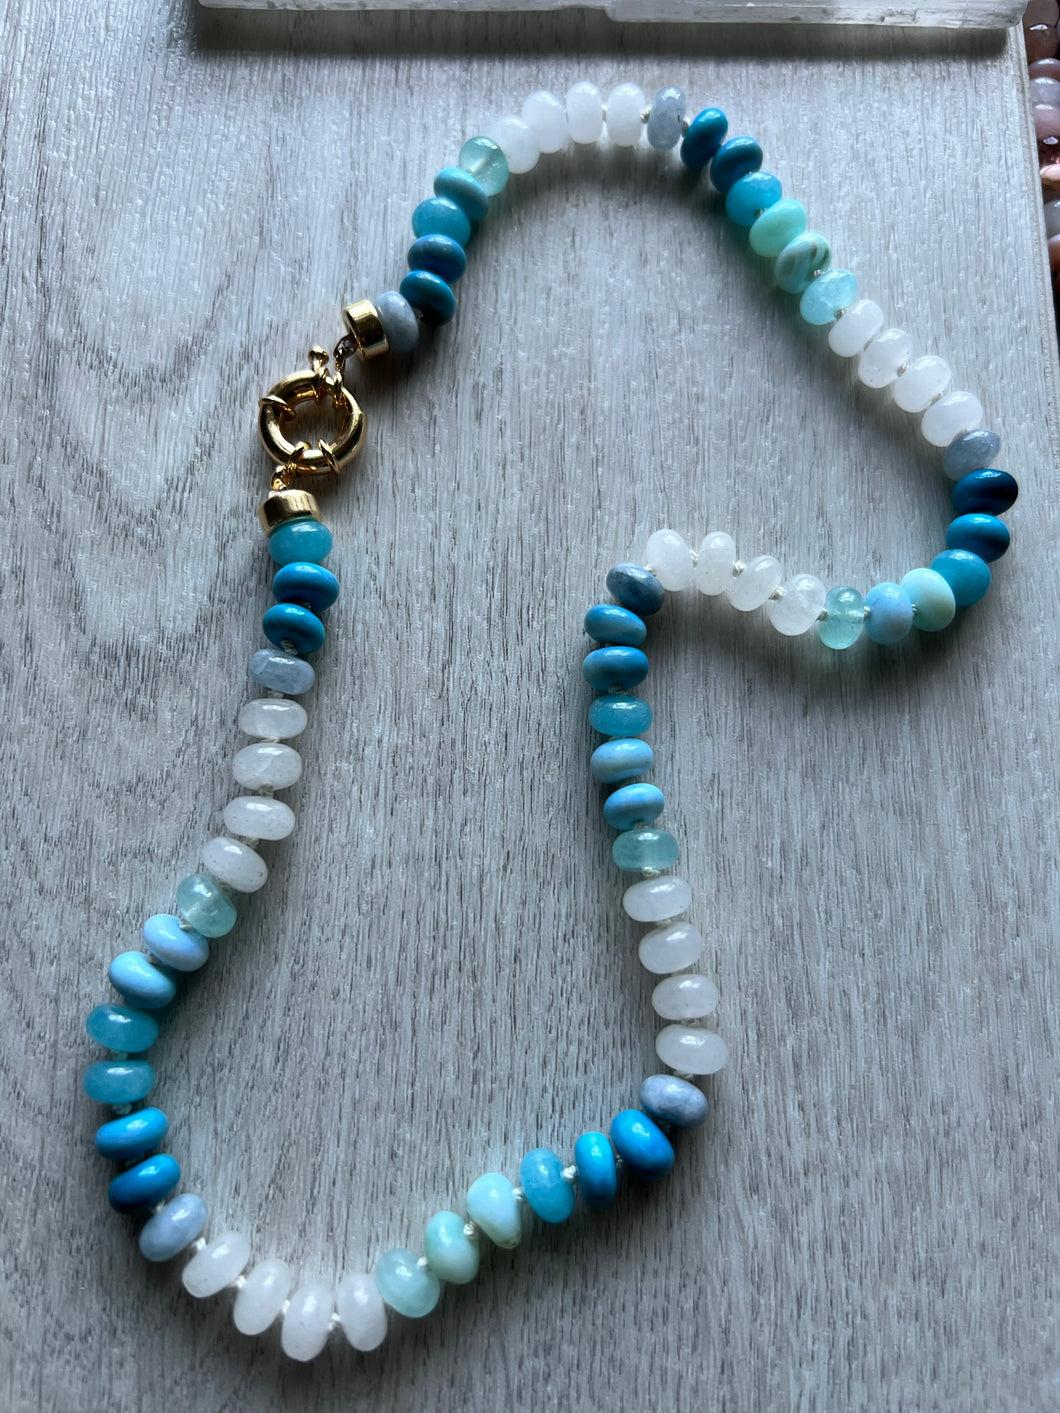 Hand knotted on blue silk this 19 inch necklace features a variety of natural smooth gemstones including moonstone, aquamarine, chalcedony and opals. Finished with a gold filled sailor clasp that allows you to easily put on and take off and add your favorite charm 